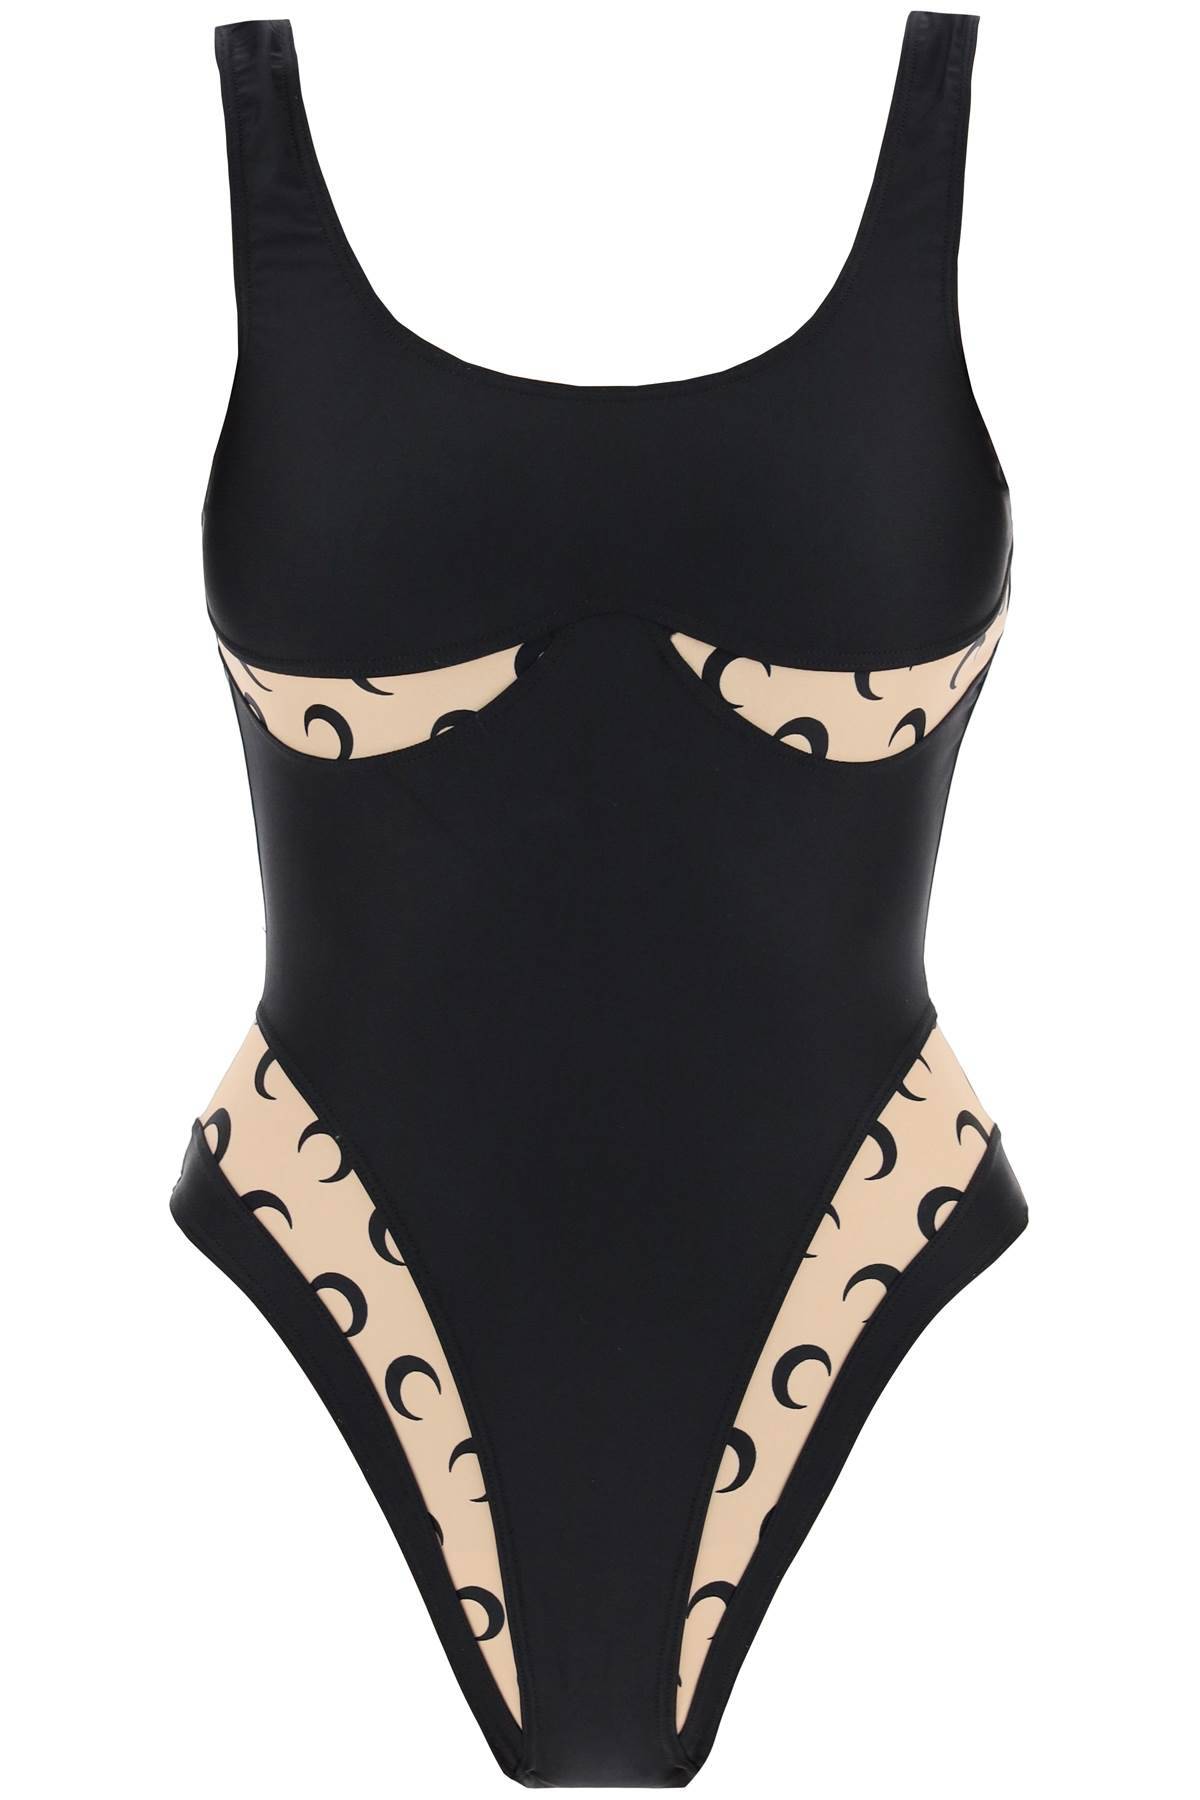 Marine Serre MARINE SERRE one-piece swimsuit with all over moon inserts